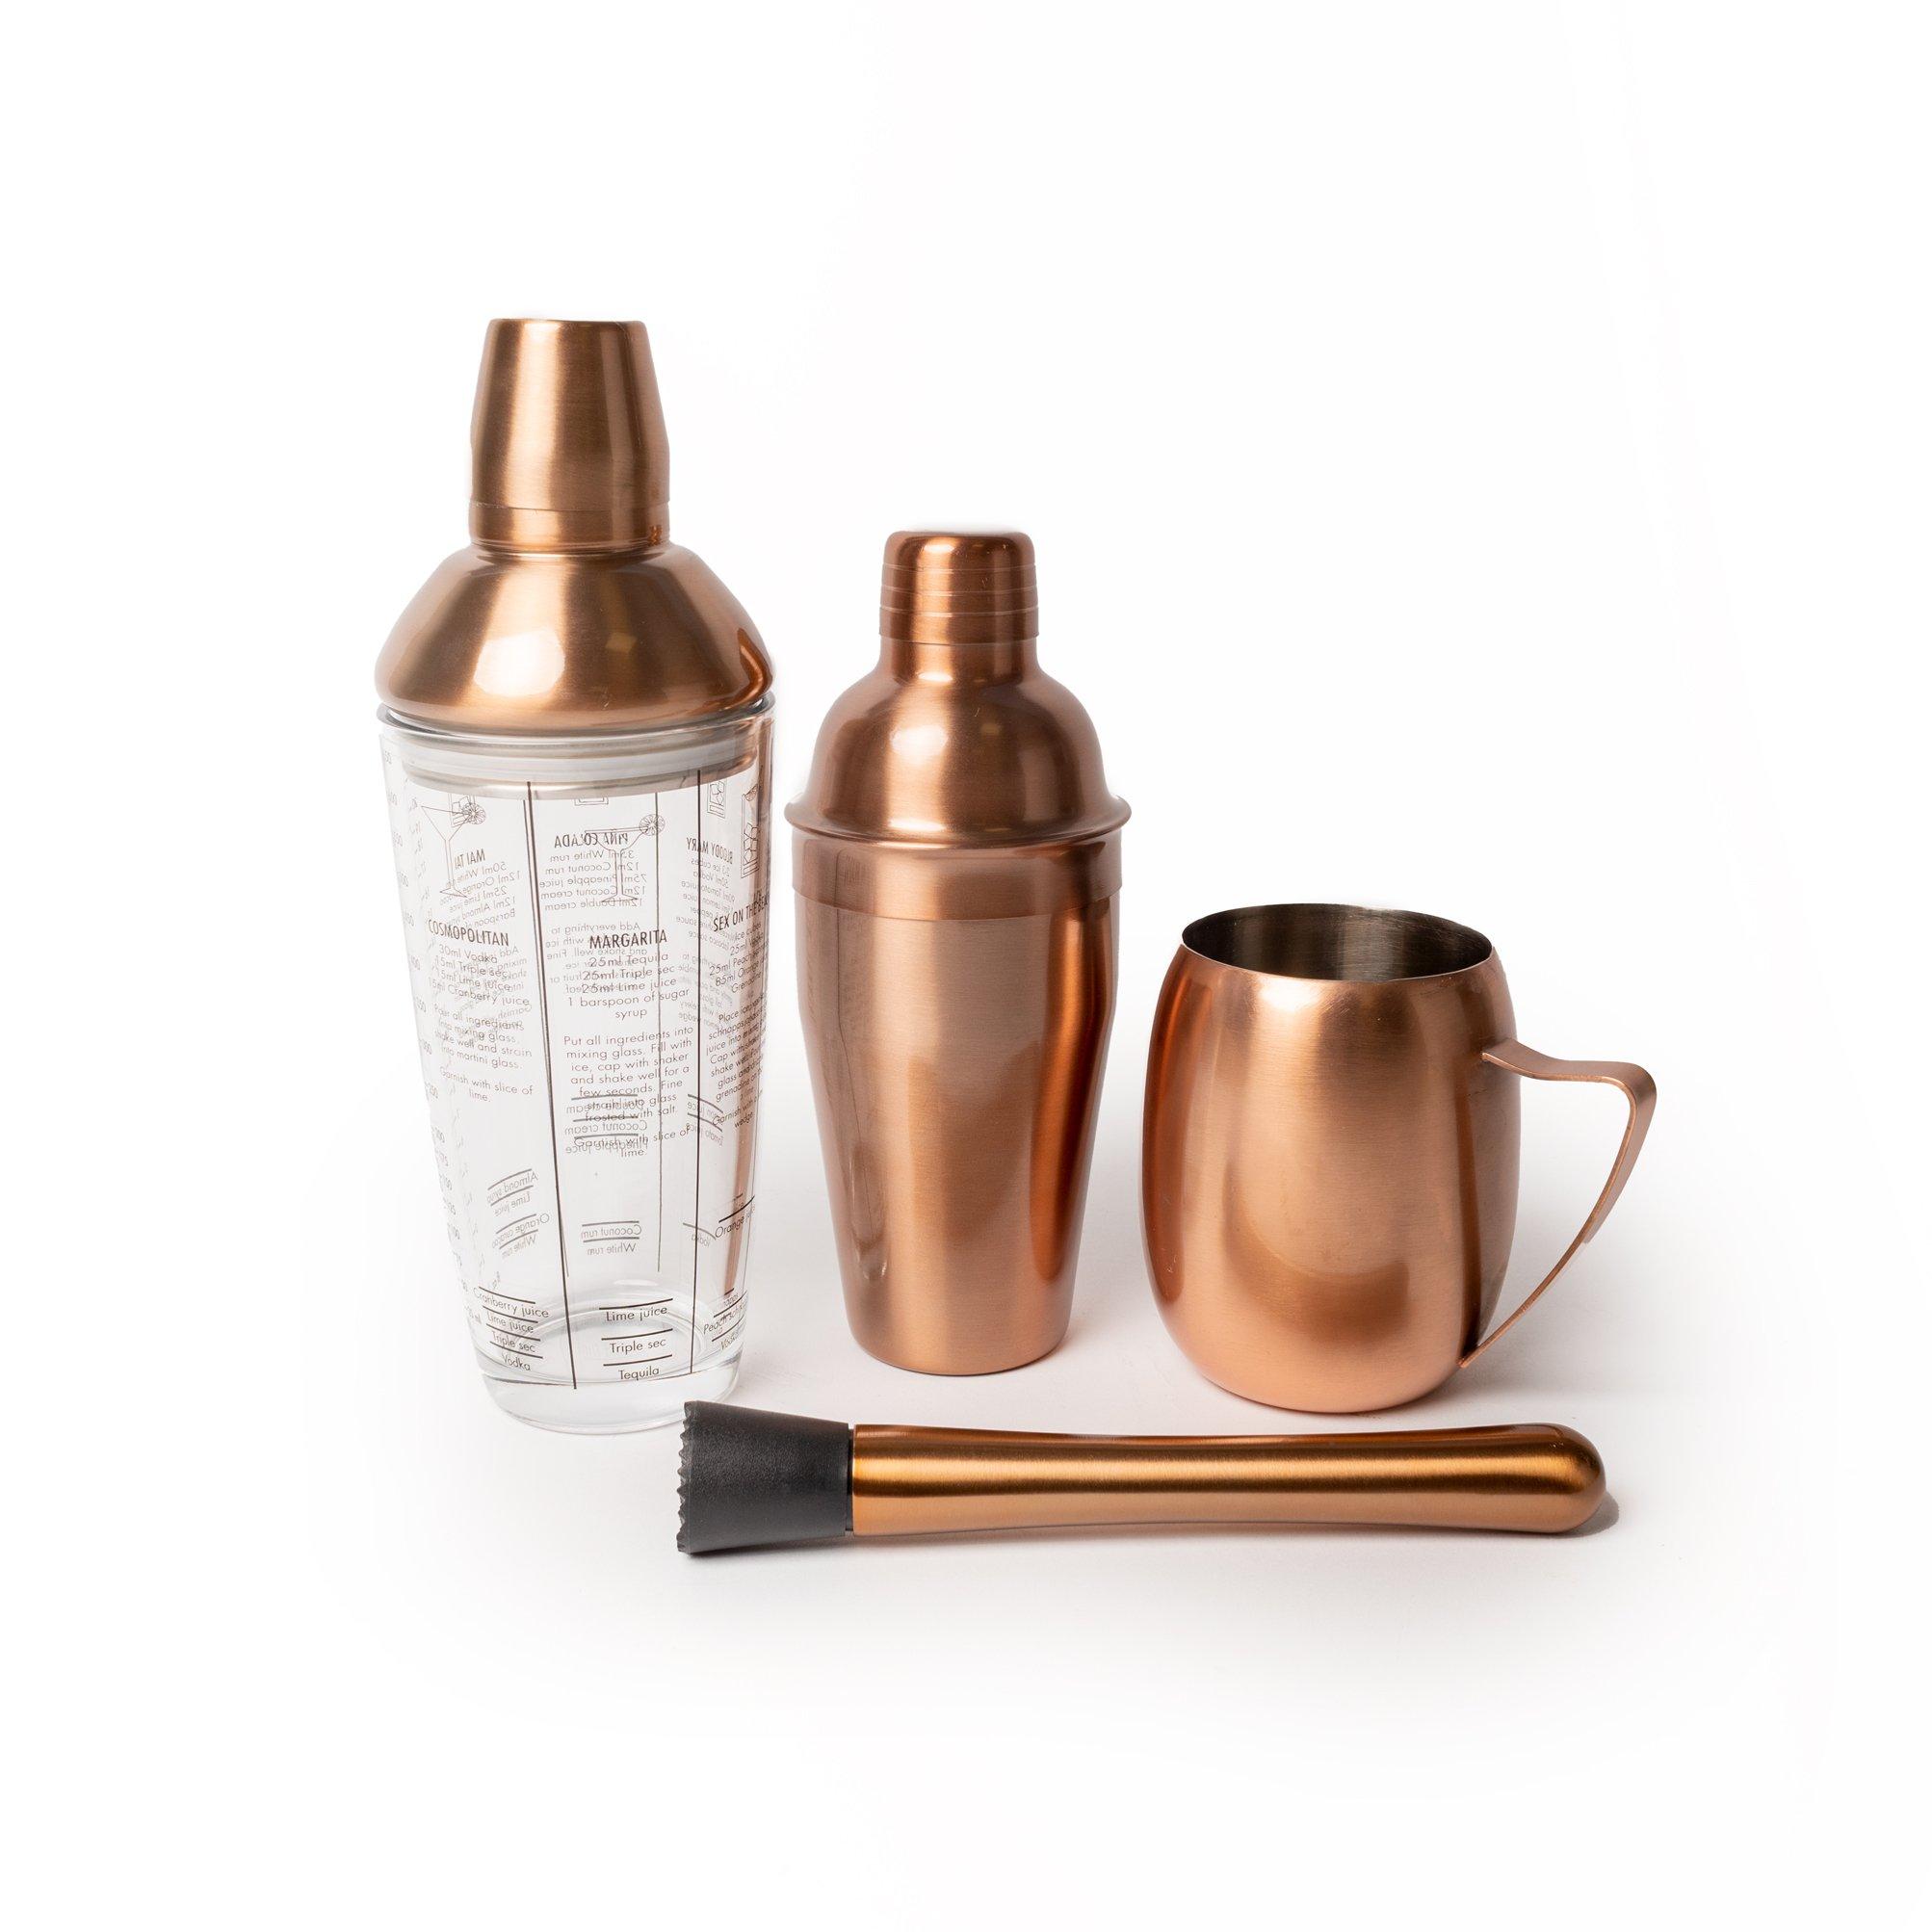 Cocktail-Making Set with Copper Finish Classic Cocktail Shaker, Boston Shaker, Muddler and Moscow Mu